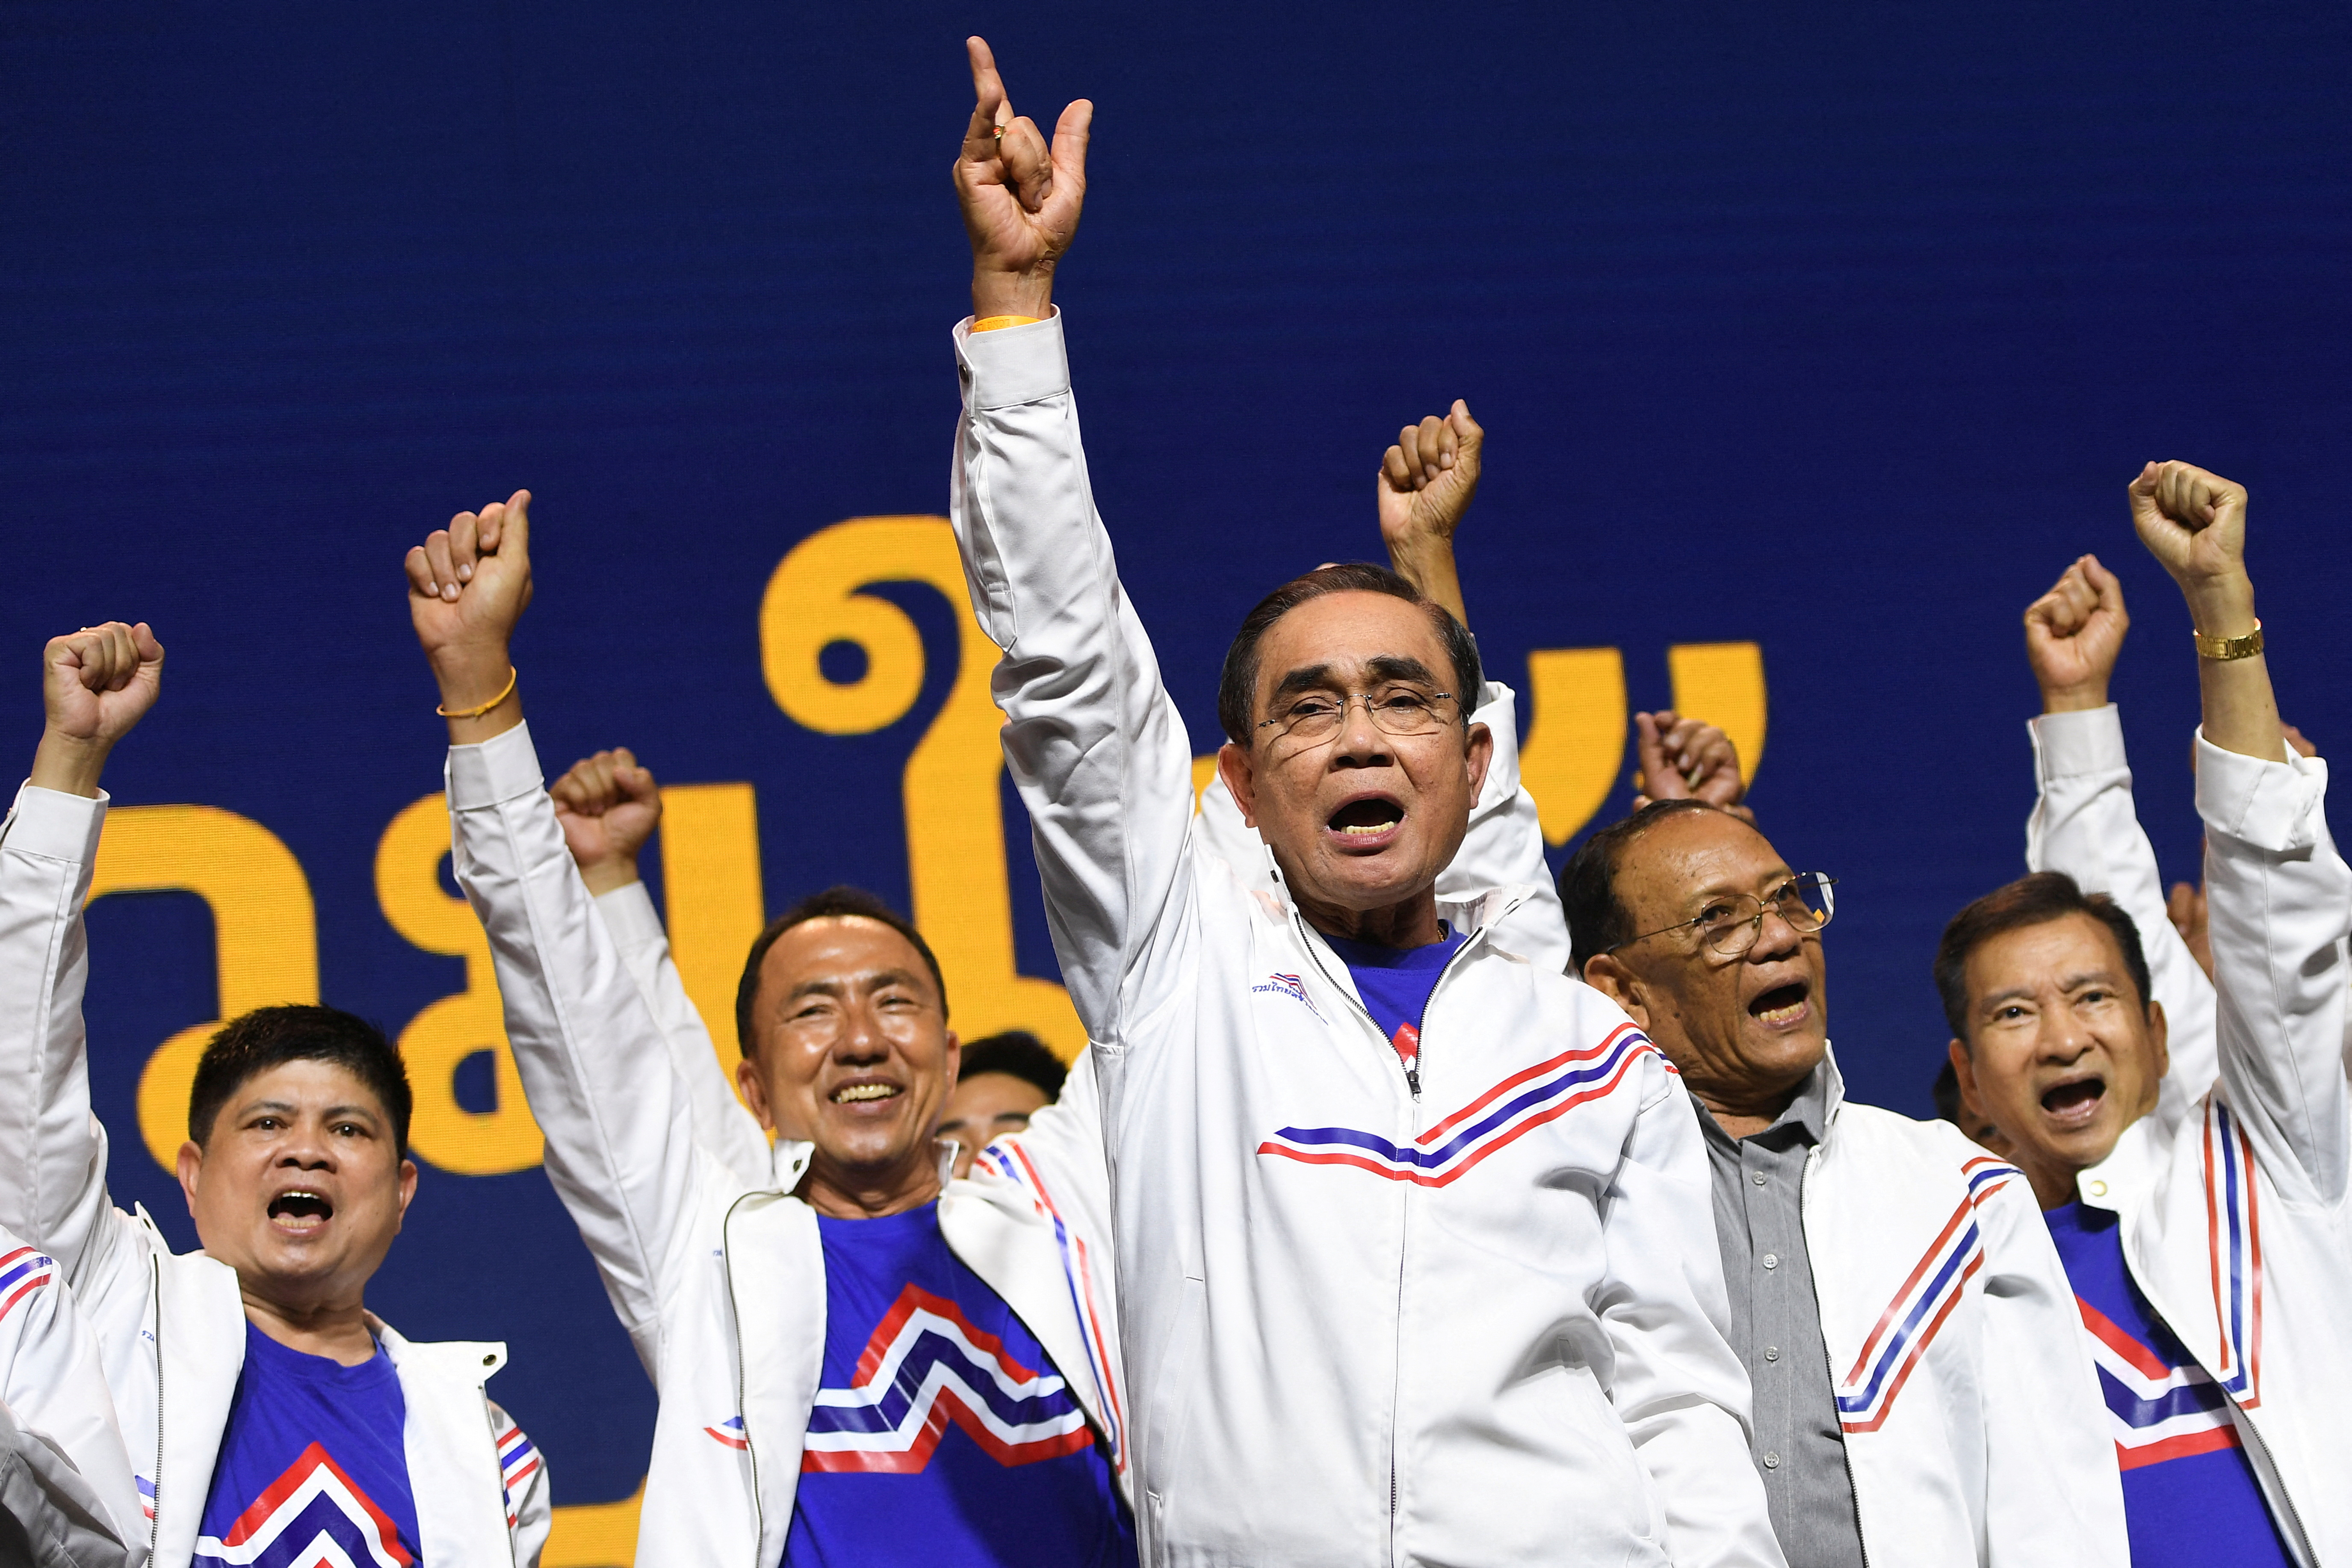 Thai Prime Minister Prayuth Chan-ocha campaigns as PM candidate for the United Thai Nation Party ahead of a general election this year, in Bangkok